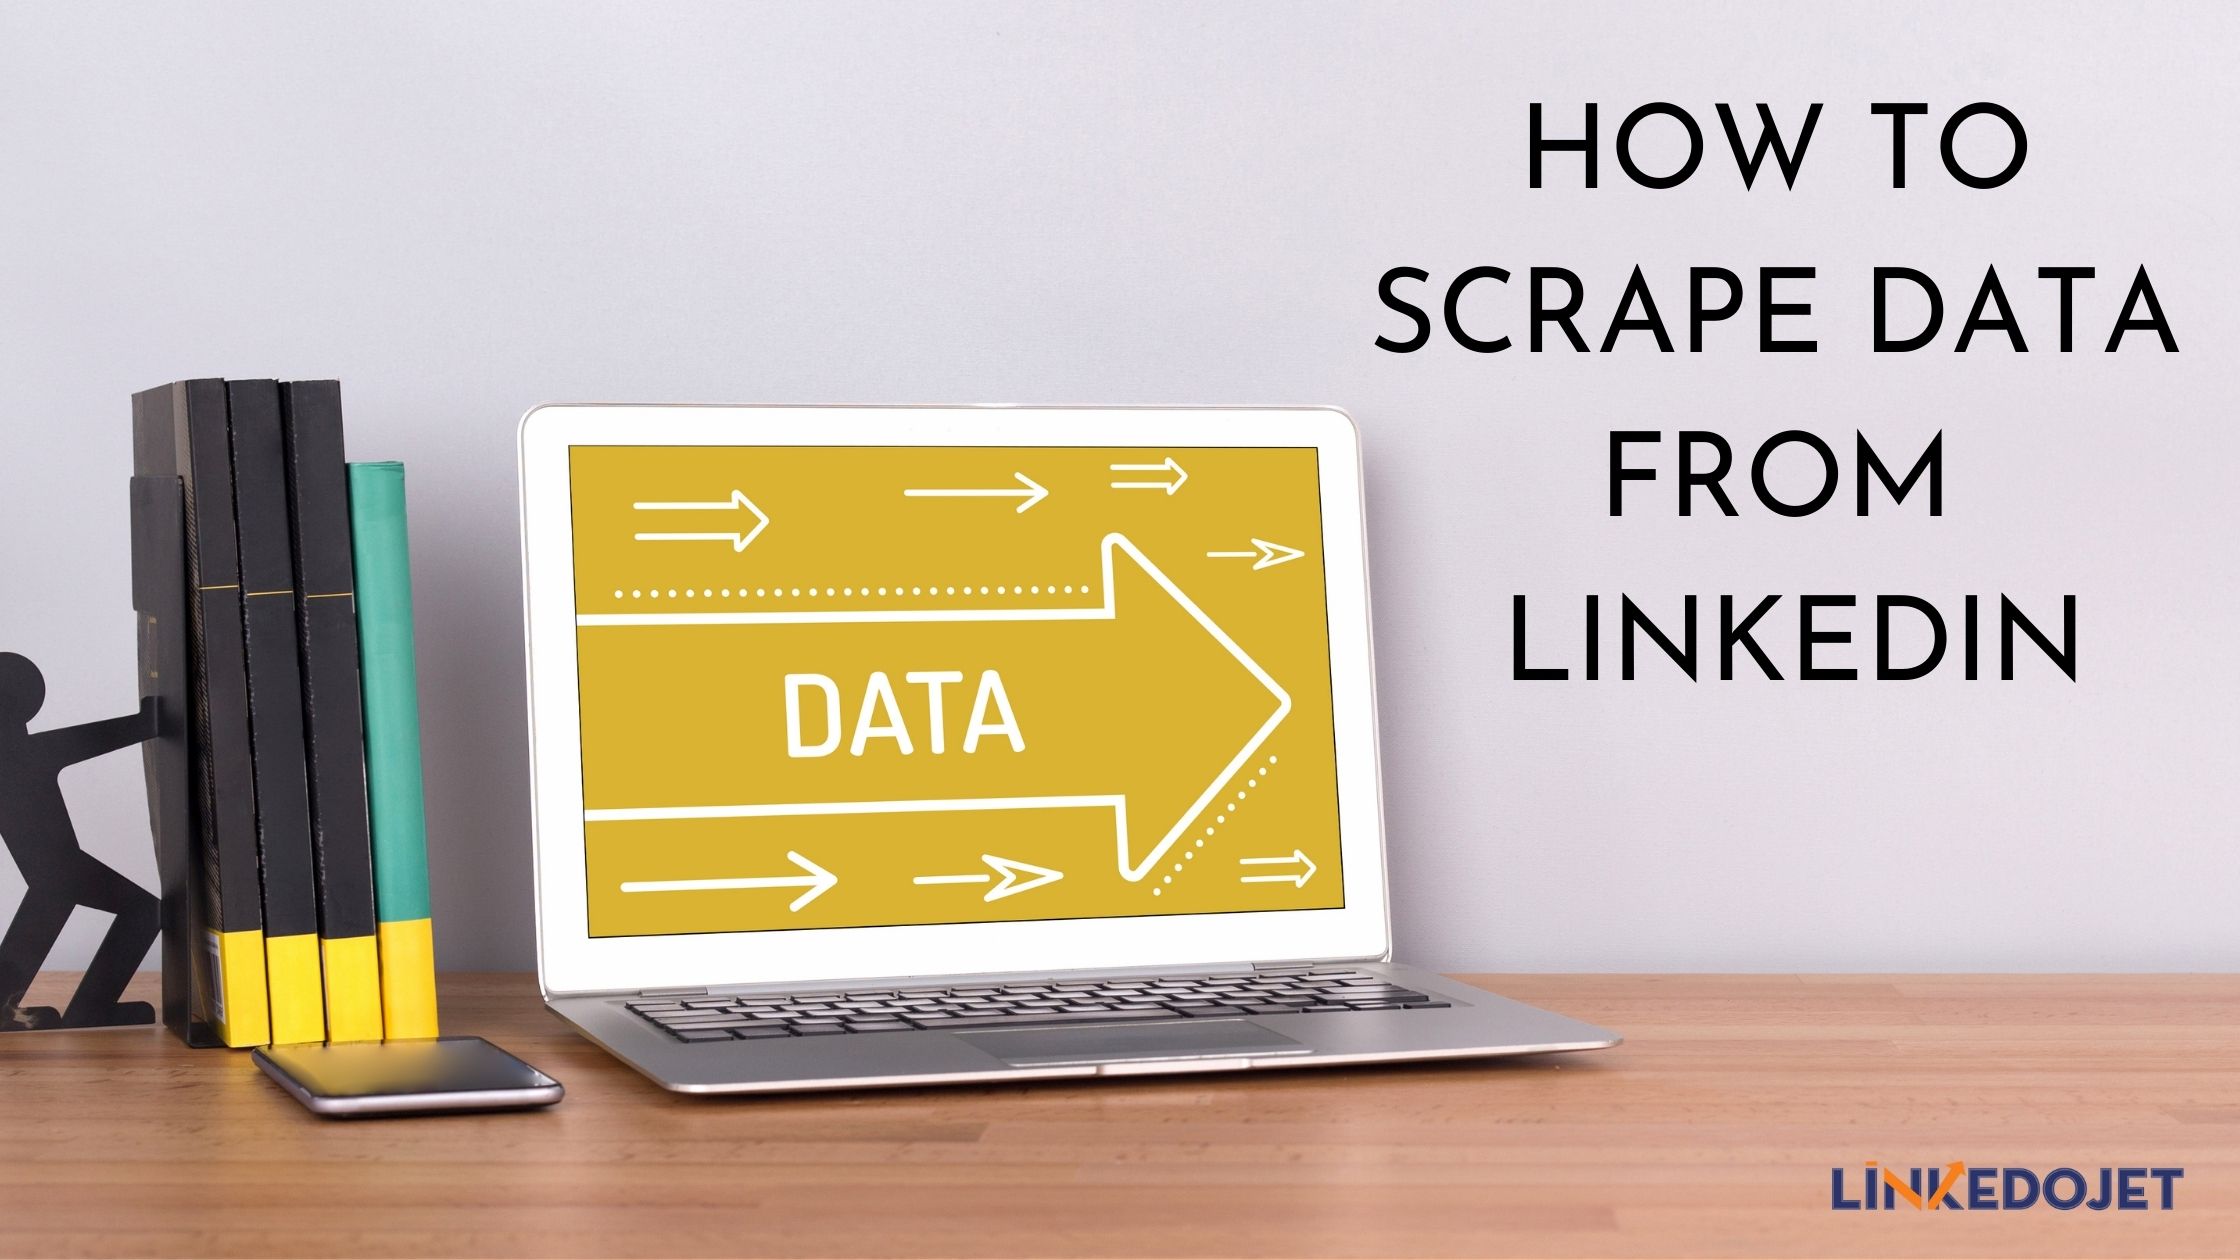 HOW TO SCRAPE DATA FROM LINKEDIN